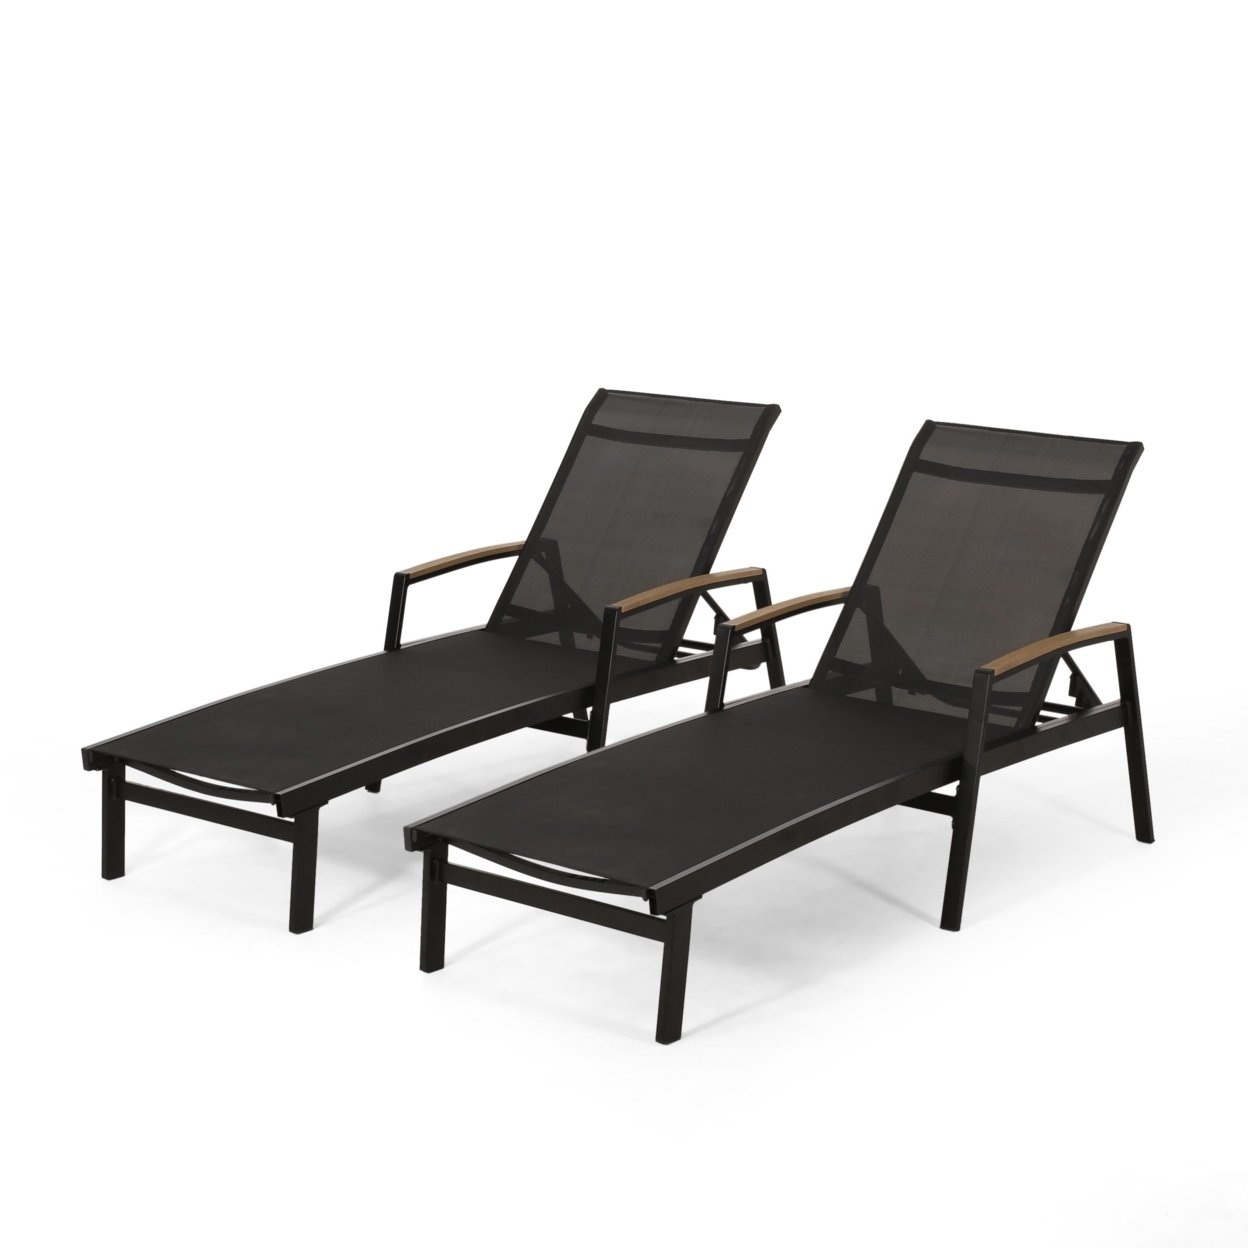 Joy Outdoor Aluminum Chaise Lounge With Mesh Seating (Set Of 2) - Black